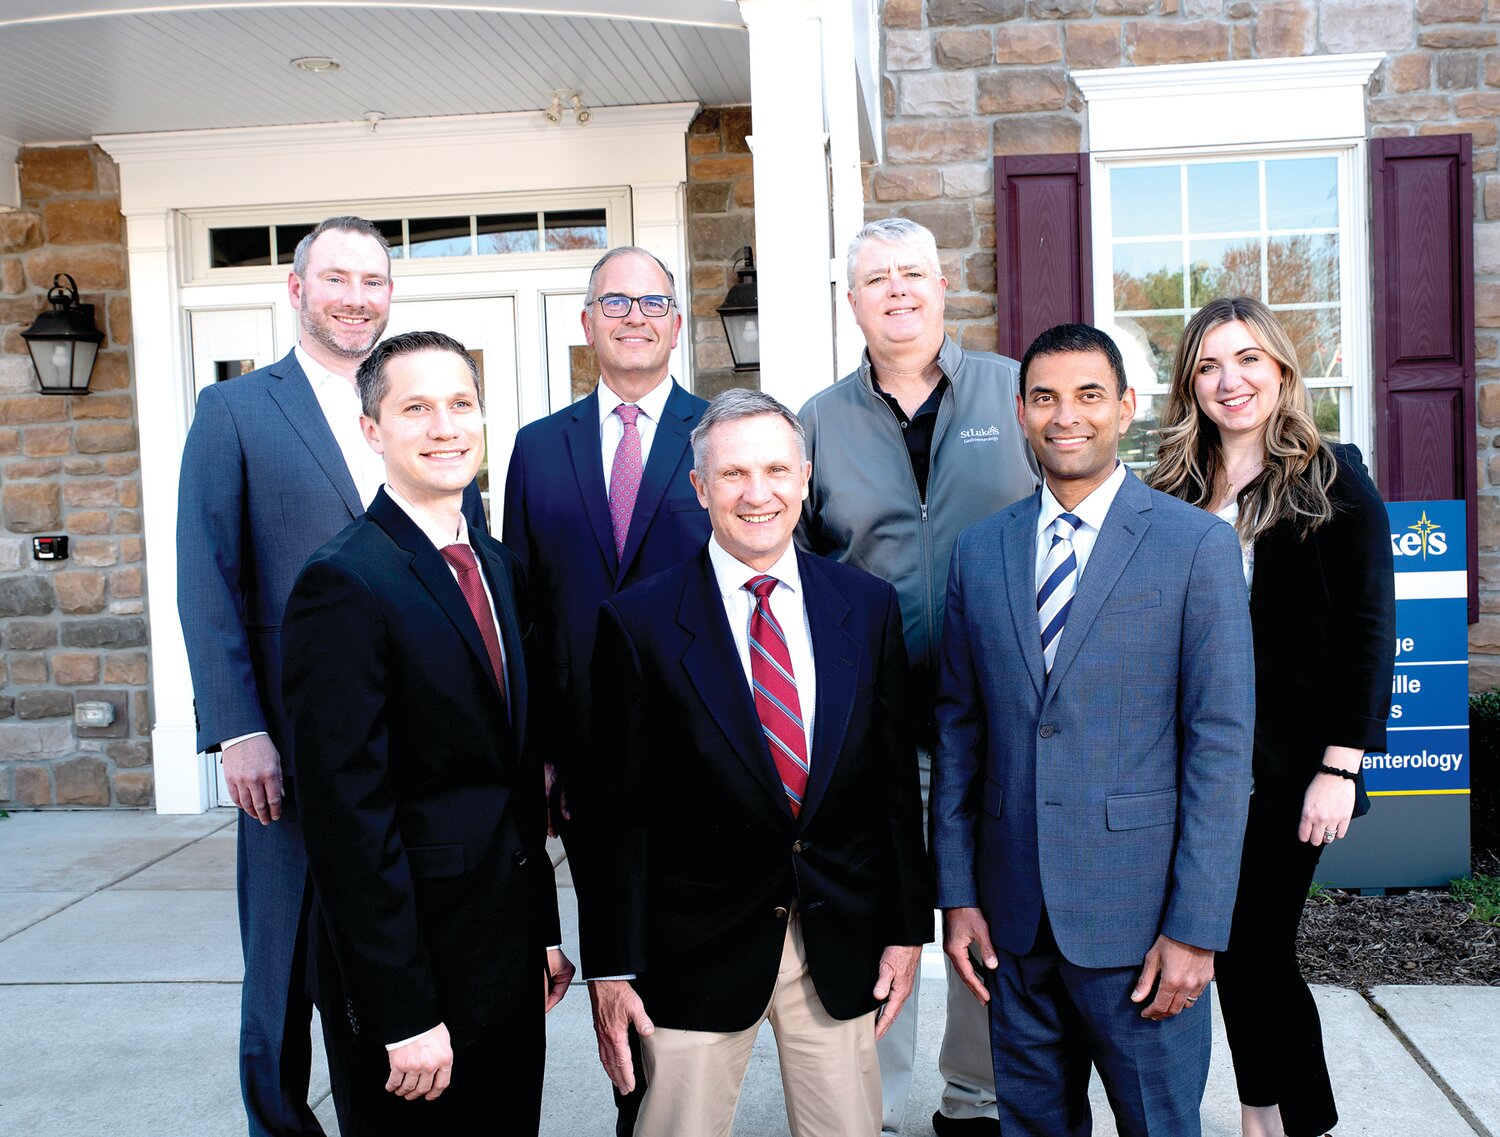 At ribbon cutting for the new St. Luke’s Buxmont Gastroenterology office in Harleysville are: back row, Dr. Christopher Hibbard, Dennis Pflieger, Dr. Michael Cassidy, Sarah Halpin; front row: Scott Siegfried, Dr. Jerome Burke and Dr. Noel Martins.